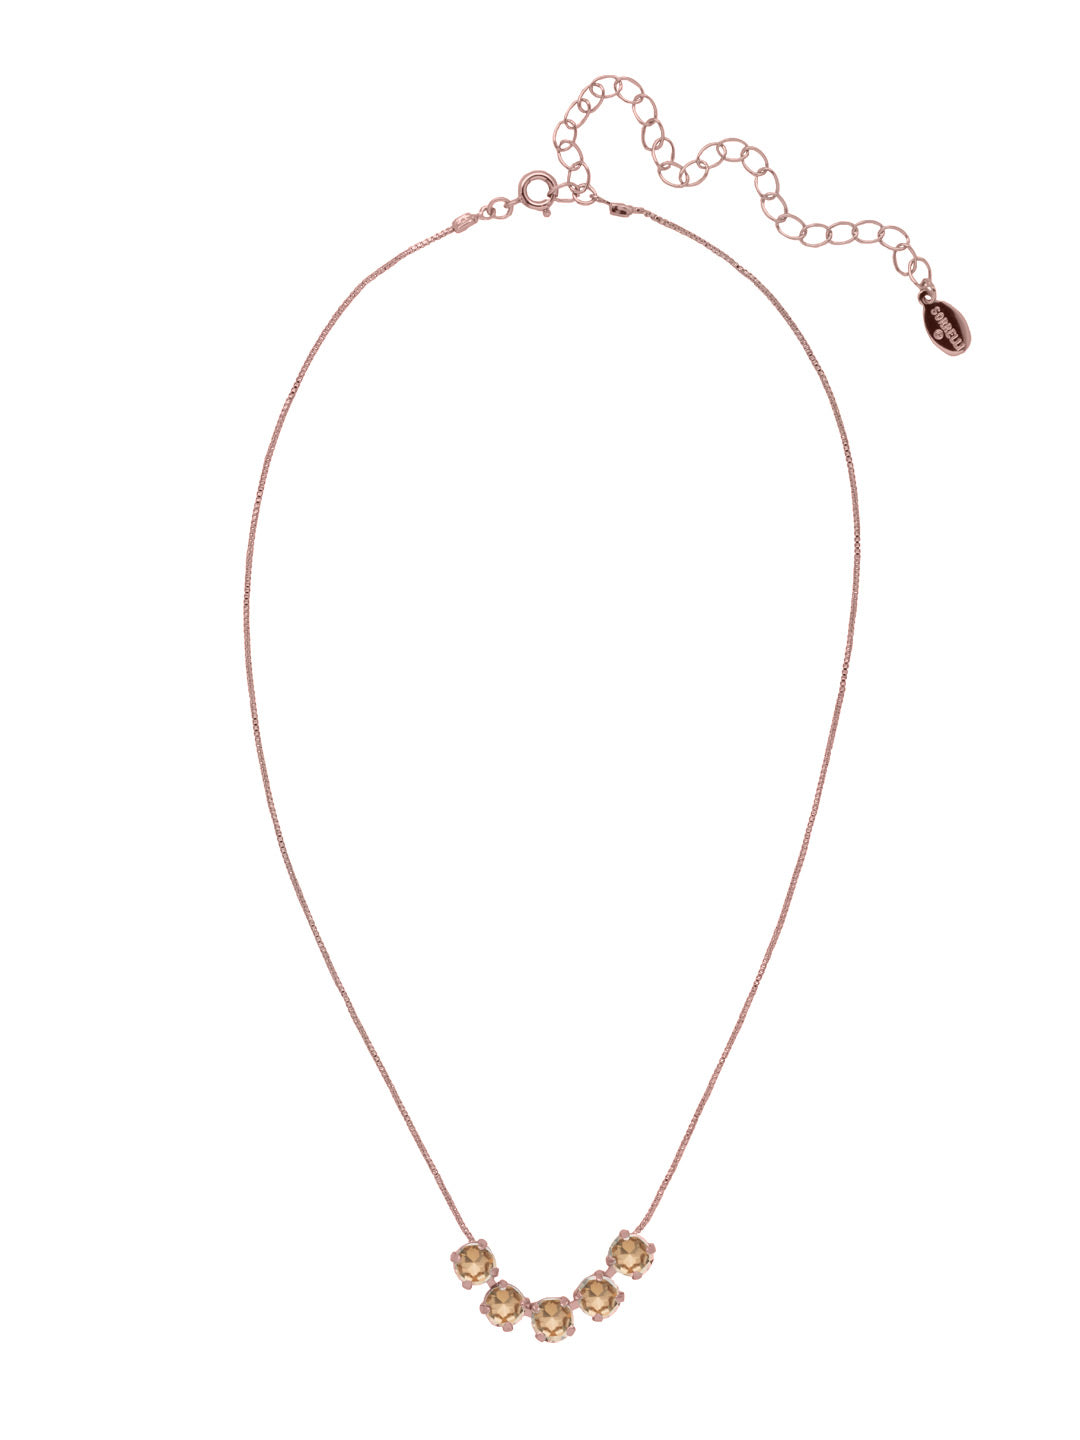 Shaughna Tennis Necklace - NFC84RGDCH - <p>The Shaughna Tennis Necklace features five crystals on a delicate adjustable chain. From Sorrelli's Dark Champagne collection in our Rose Gold-tone finish.</p>